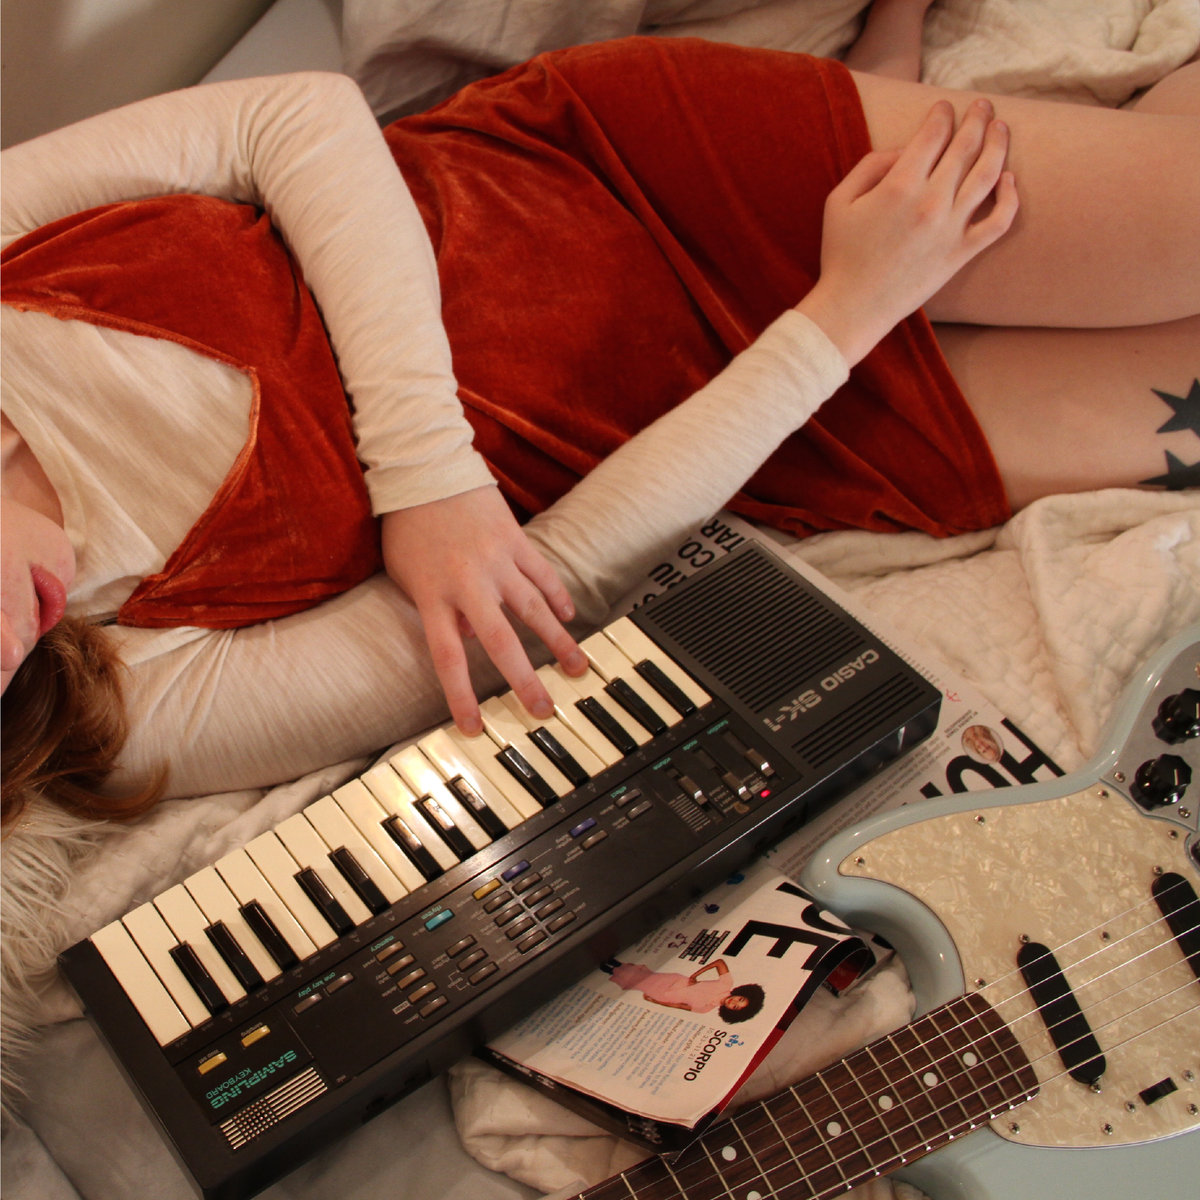 Review of 'Collection'' by Soccer Mommy